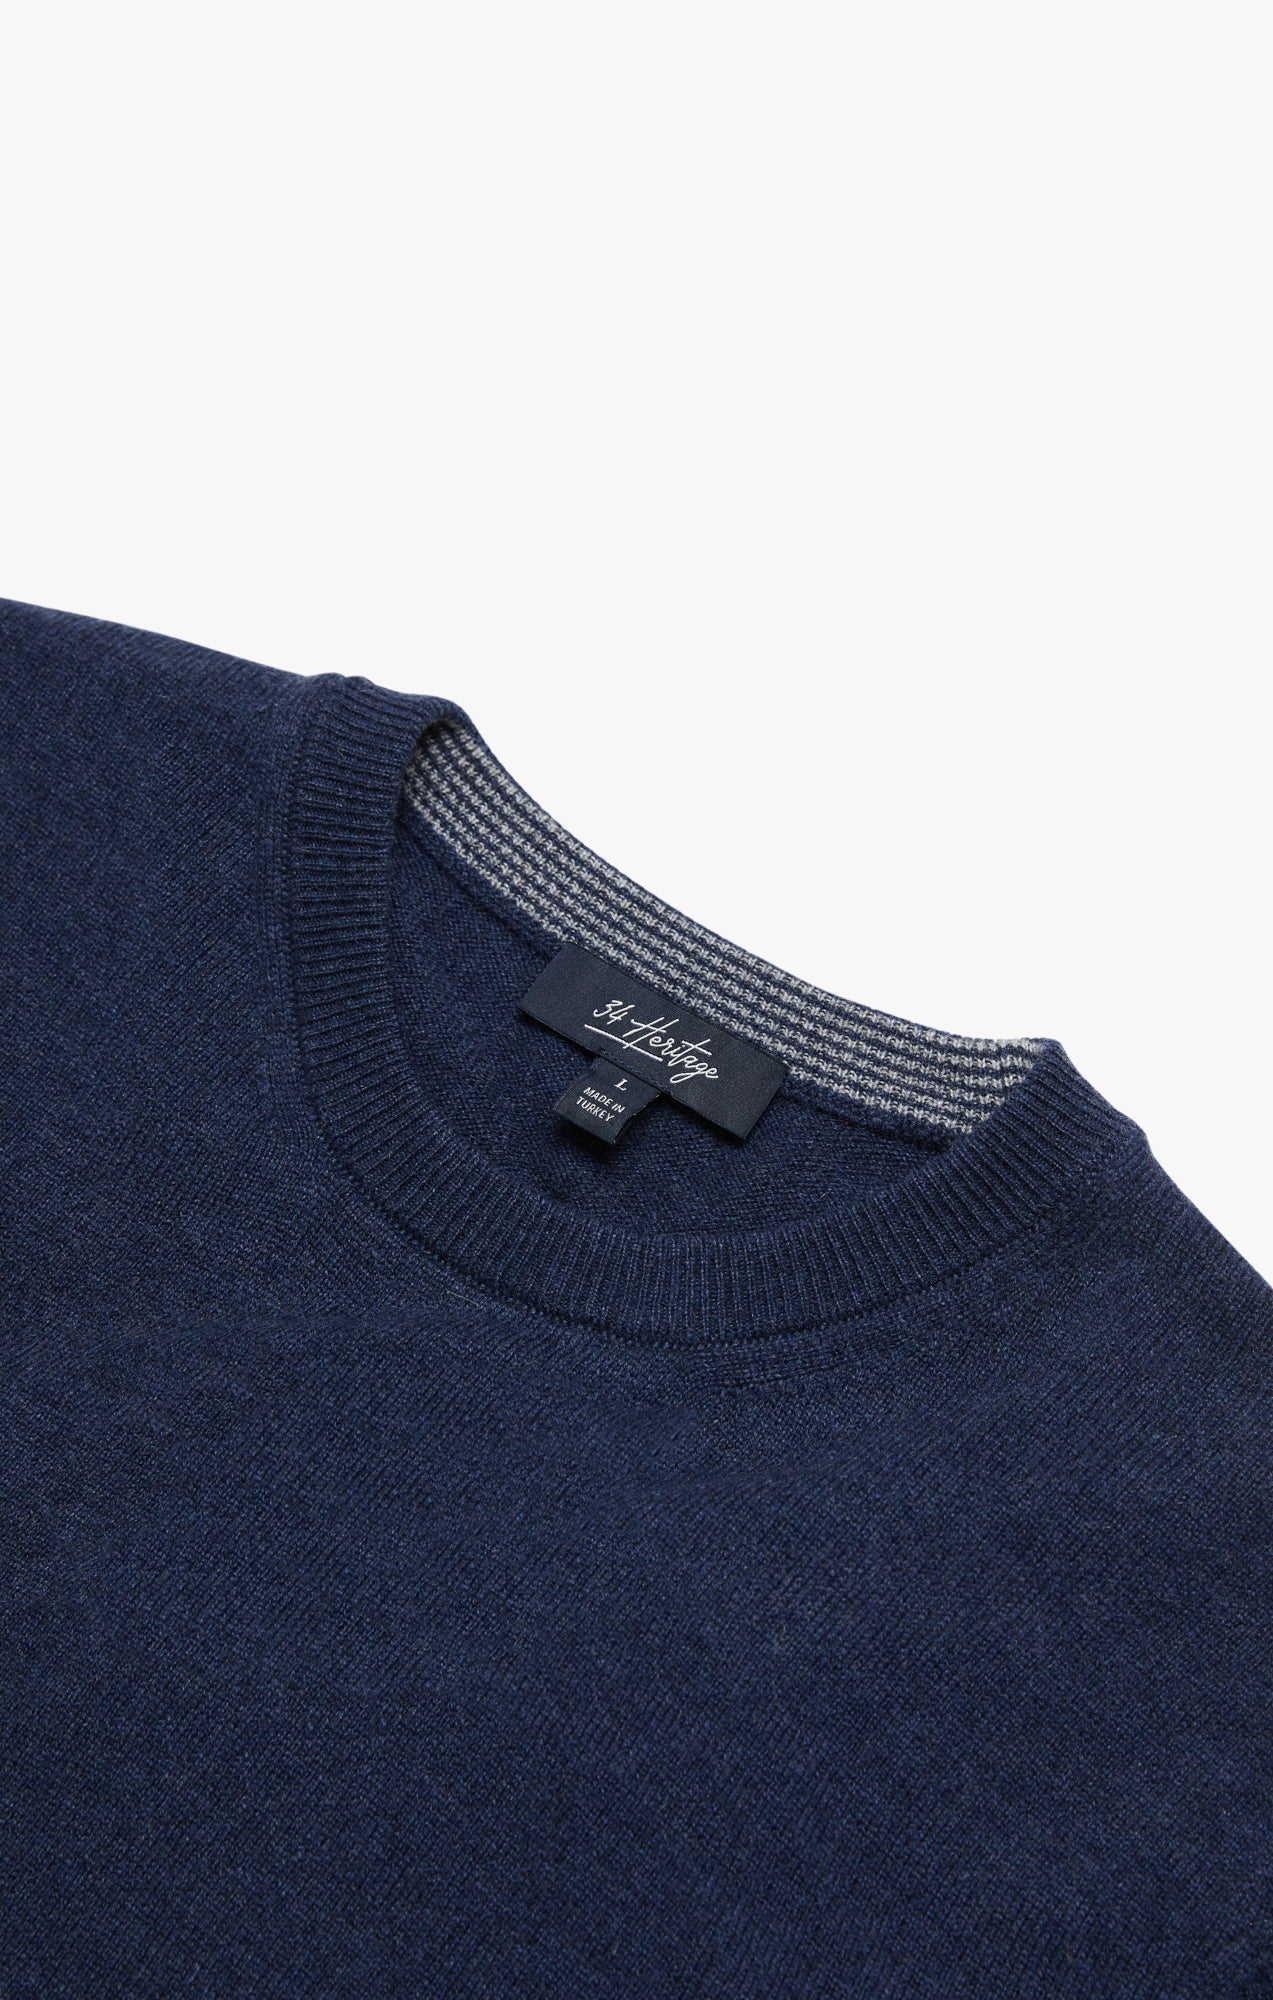 Cashmere Crew Neck Sweater In Navy Image 9